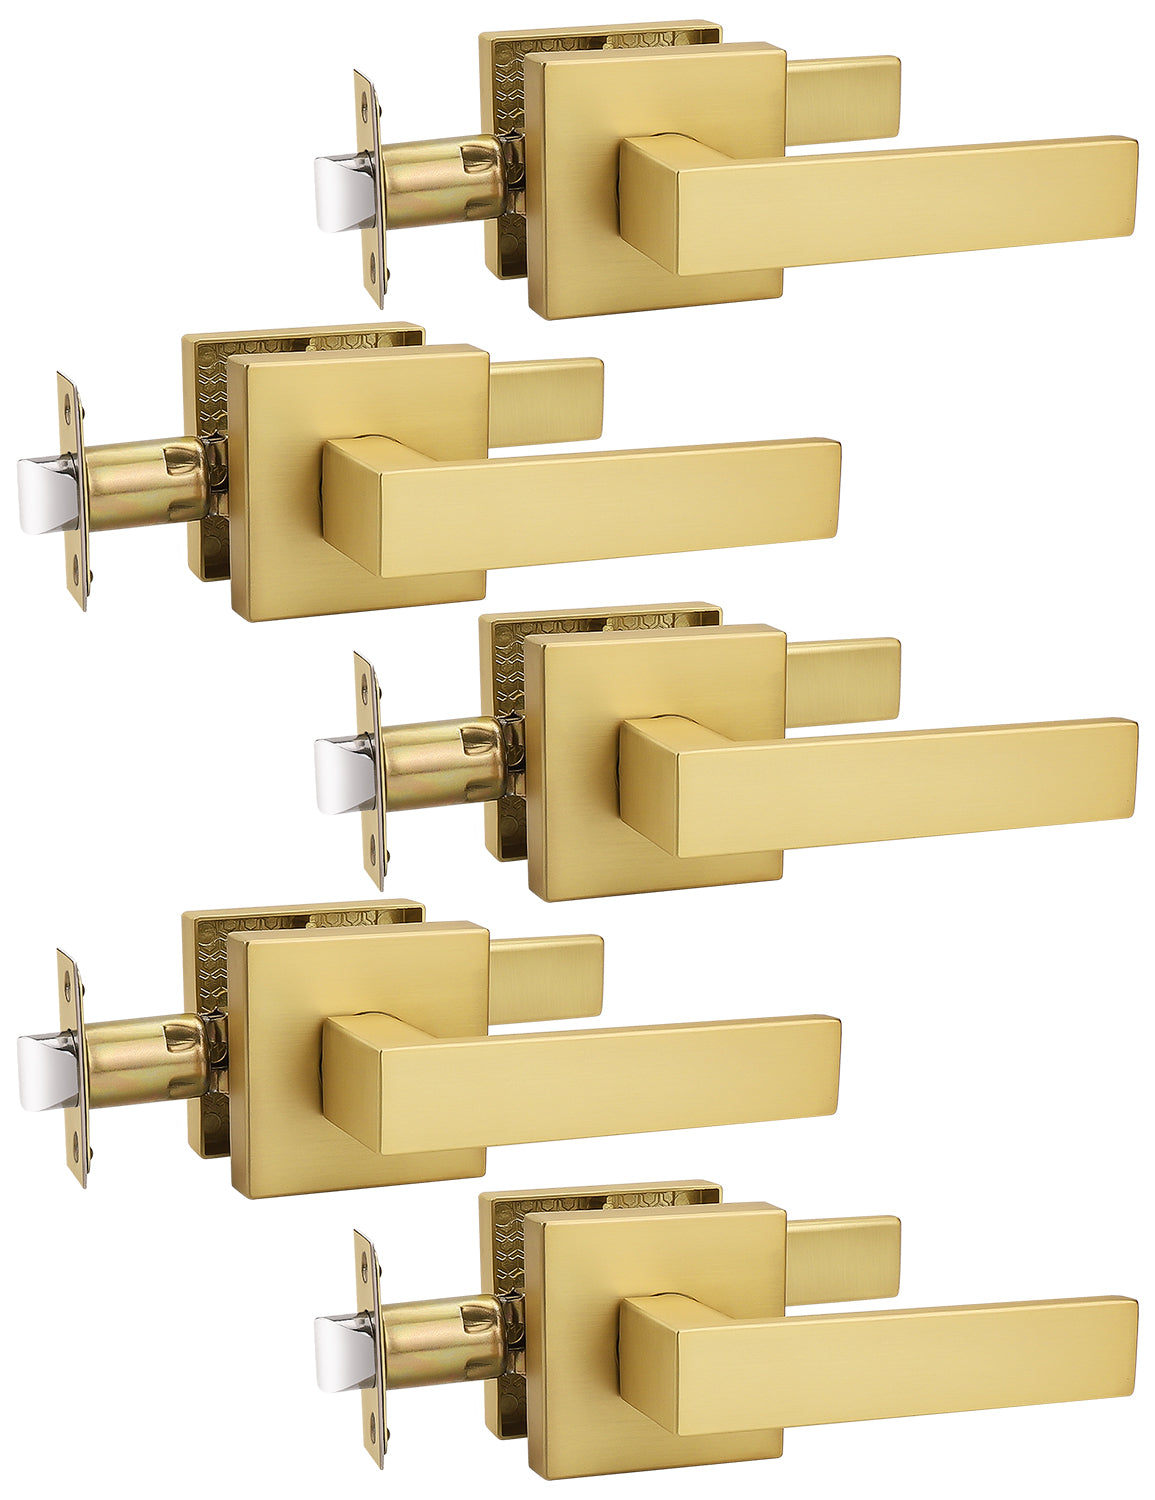 Tinewa 5 Pack Gold Keyless Square Levers Handles, Interior Passage Door Locksets for Hall Closet Door Knobs Lock Reversible Right & Left Handed